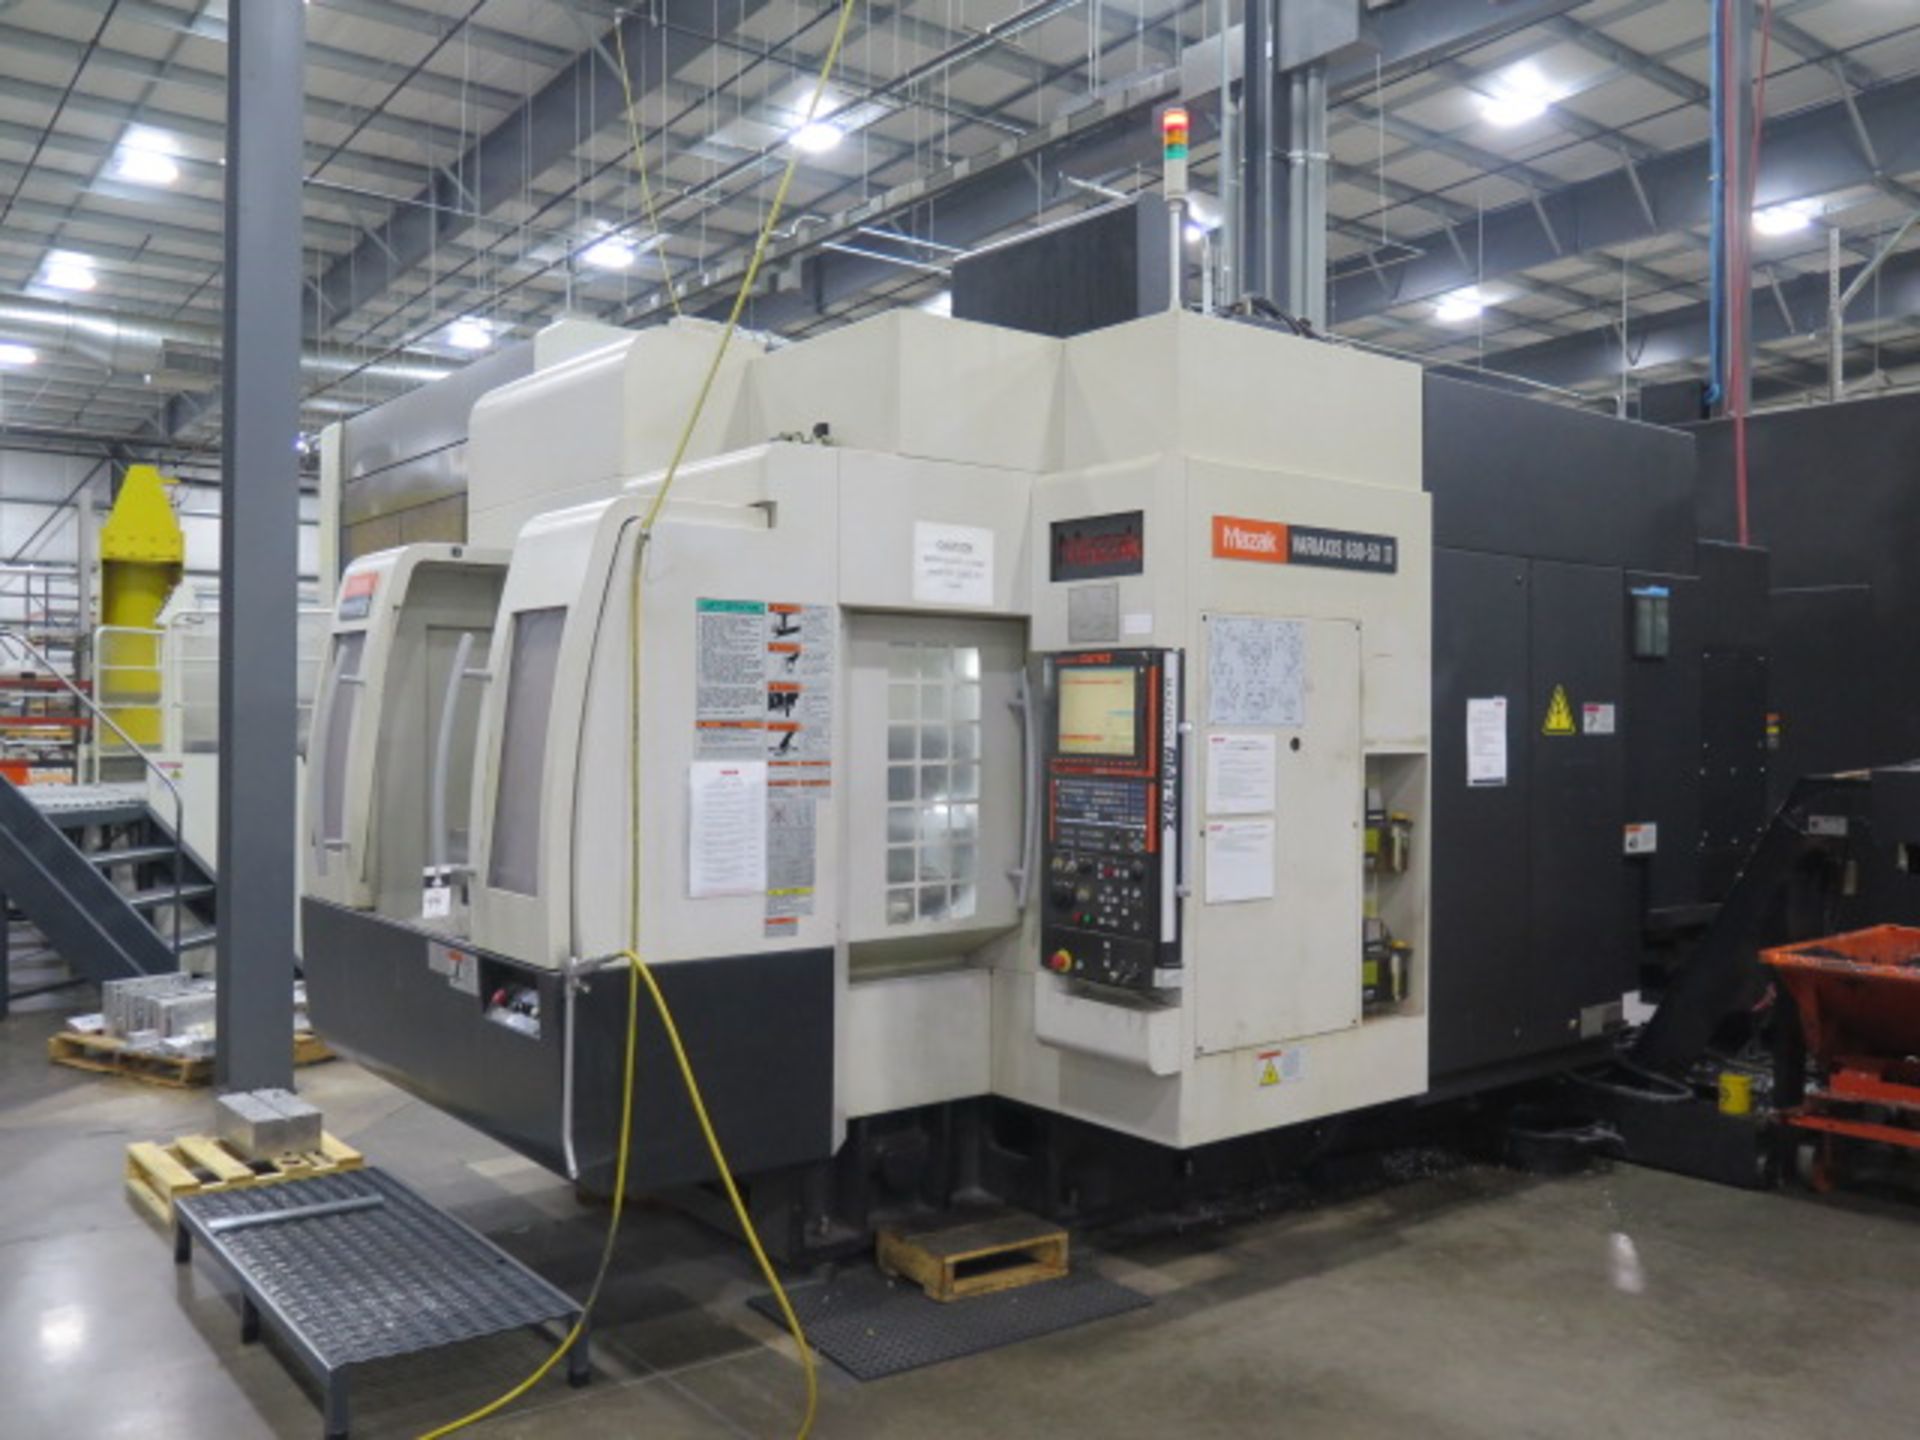 2007 Mazak Variaxis 630-5XII 2-Pallet 5-Axis CNC Vertical Machining Center s/n 198205 SOLD AS IS